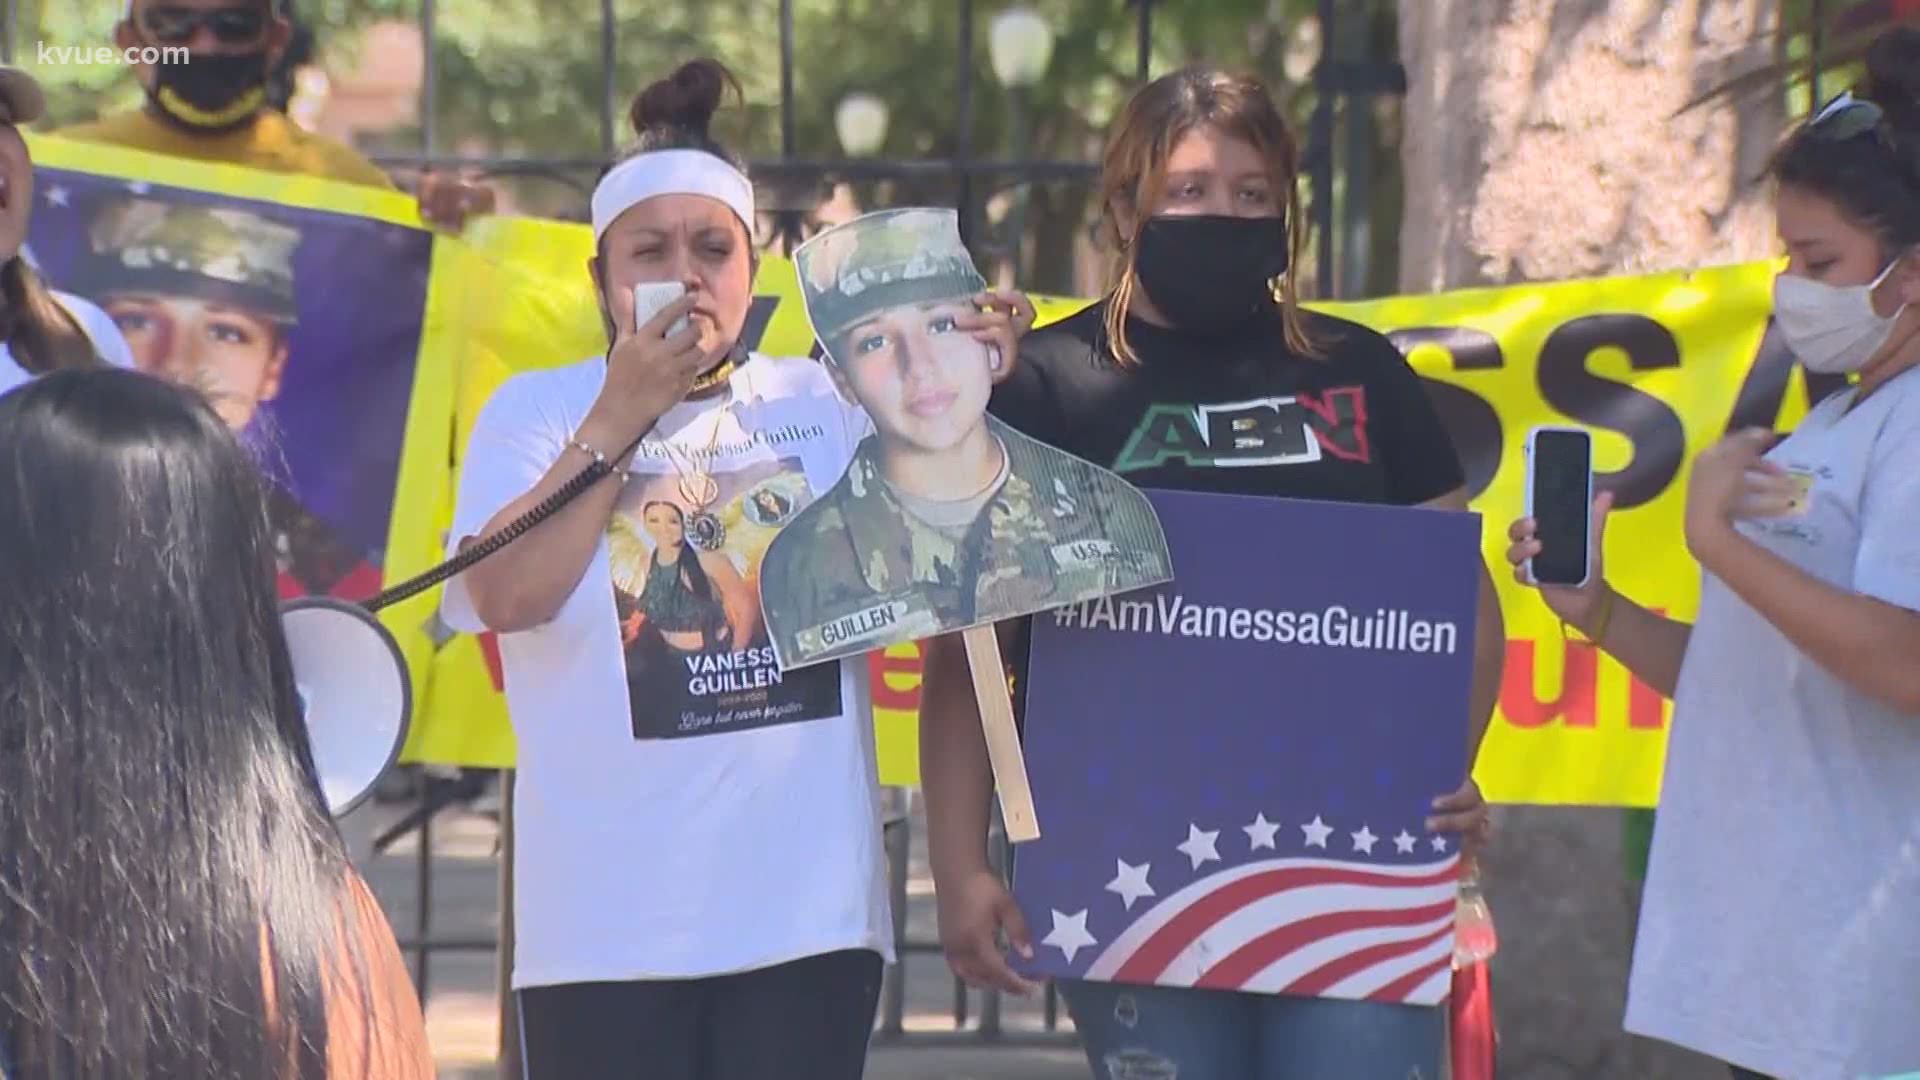 On Monday, protesters in Austin are demanding justice for specialist Vanessa Guillen.